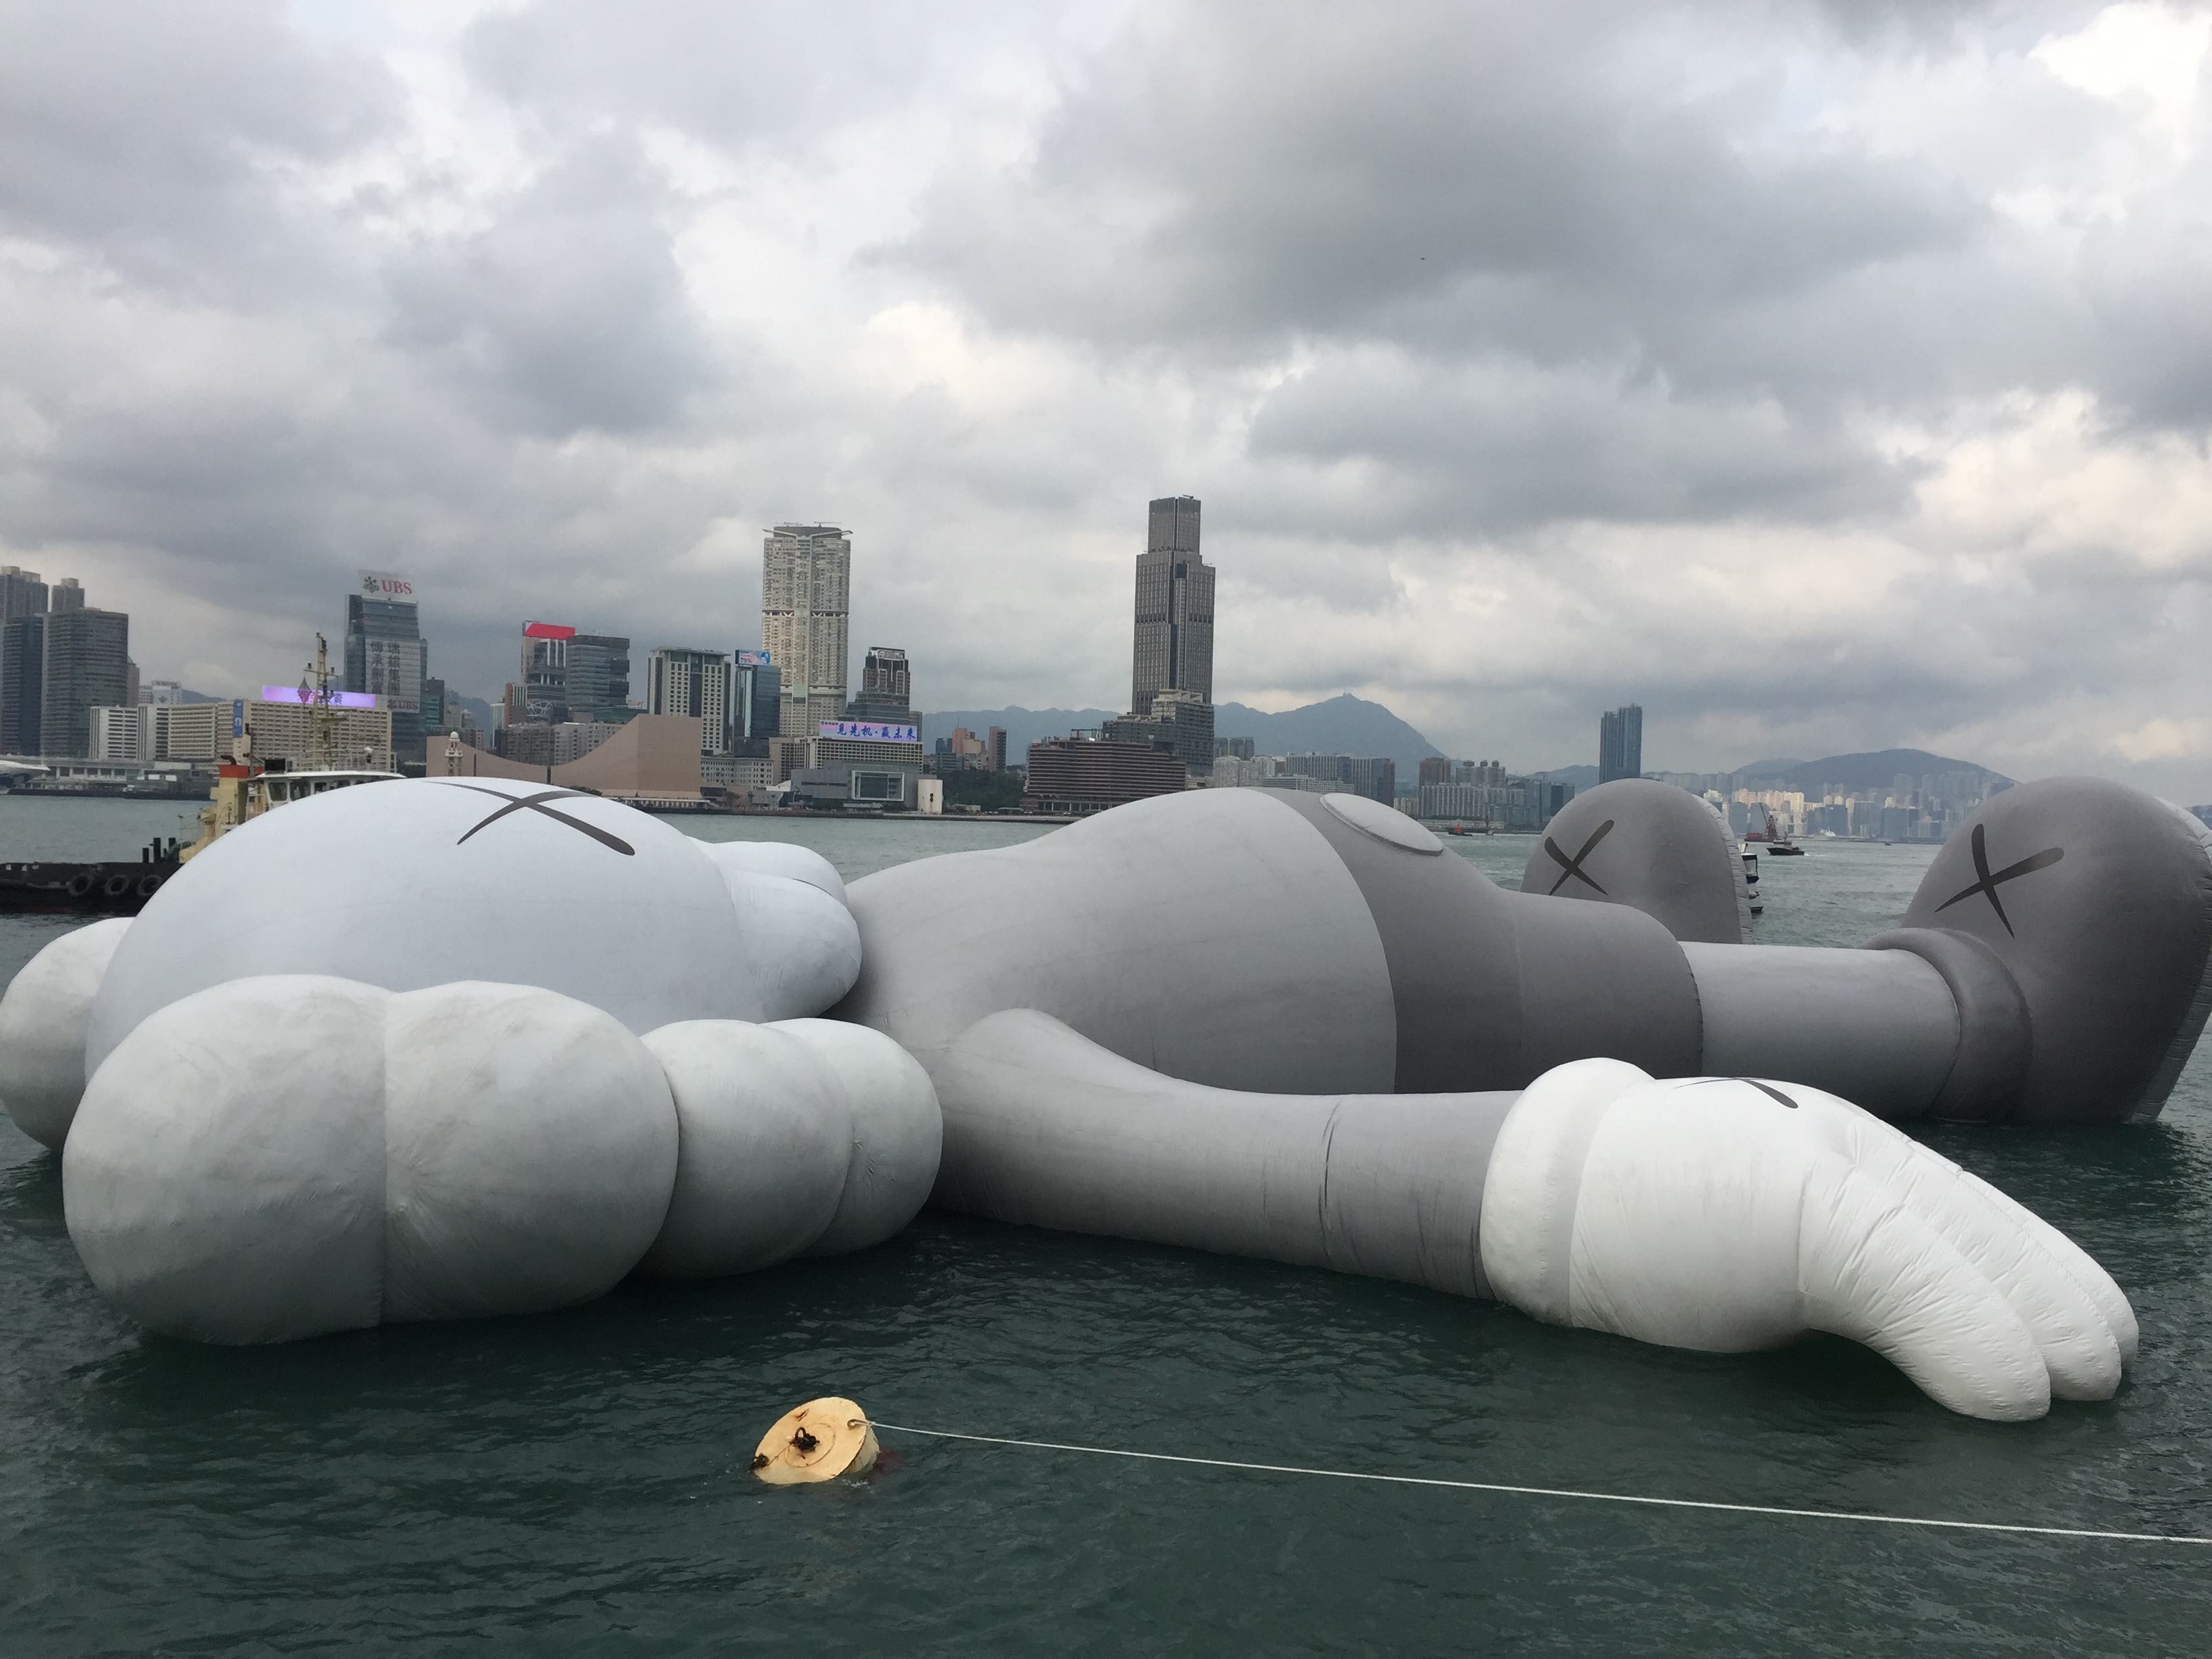 The “KAWS:HOLIDAY” installation moored on the Hong Kong waterfront this afternoon. Photo by Stuart White.